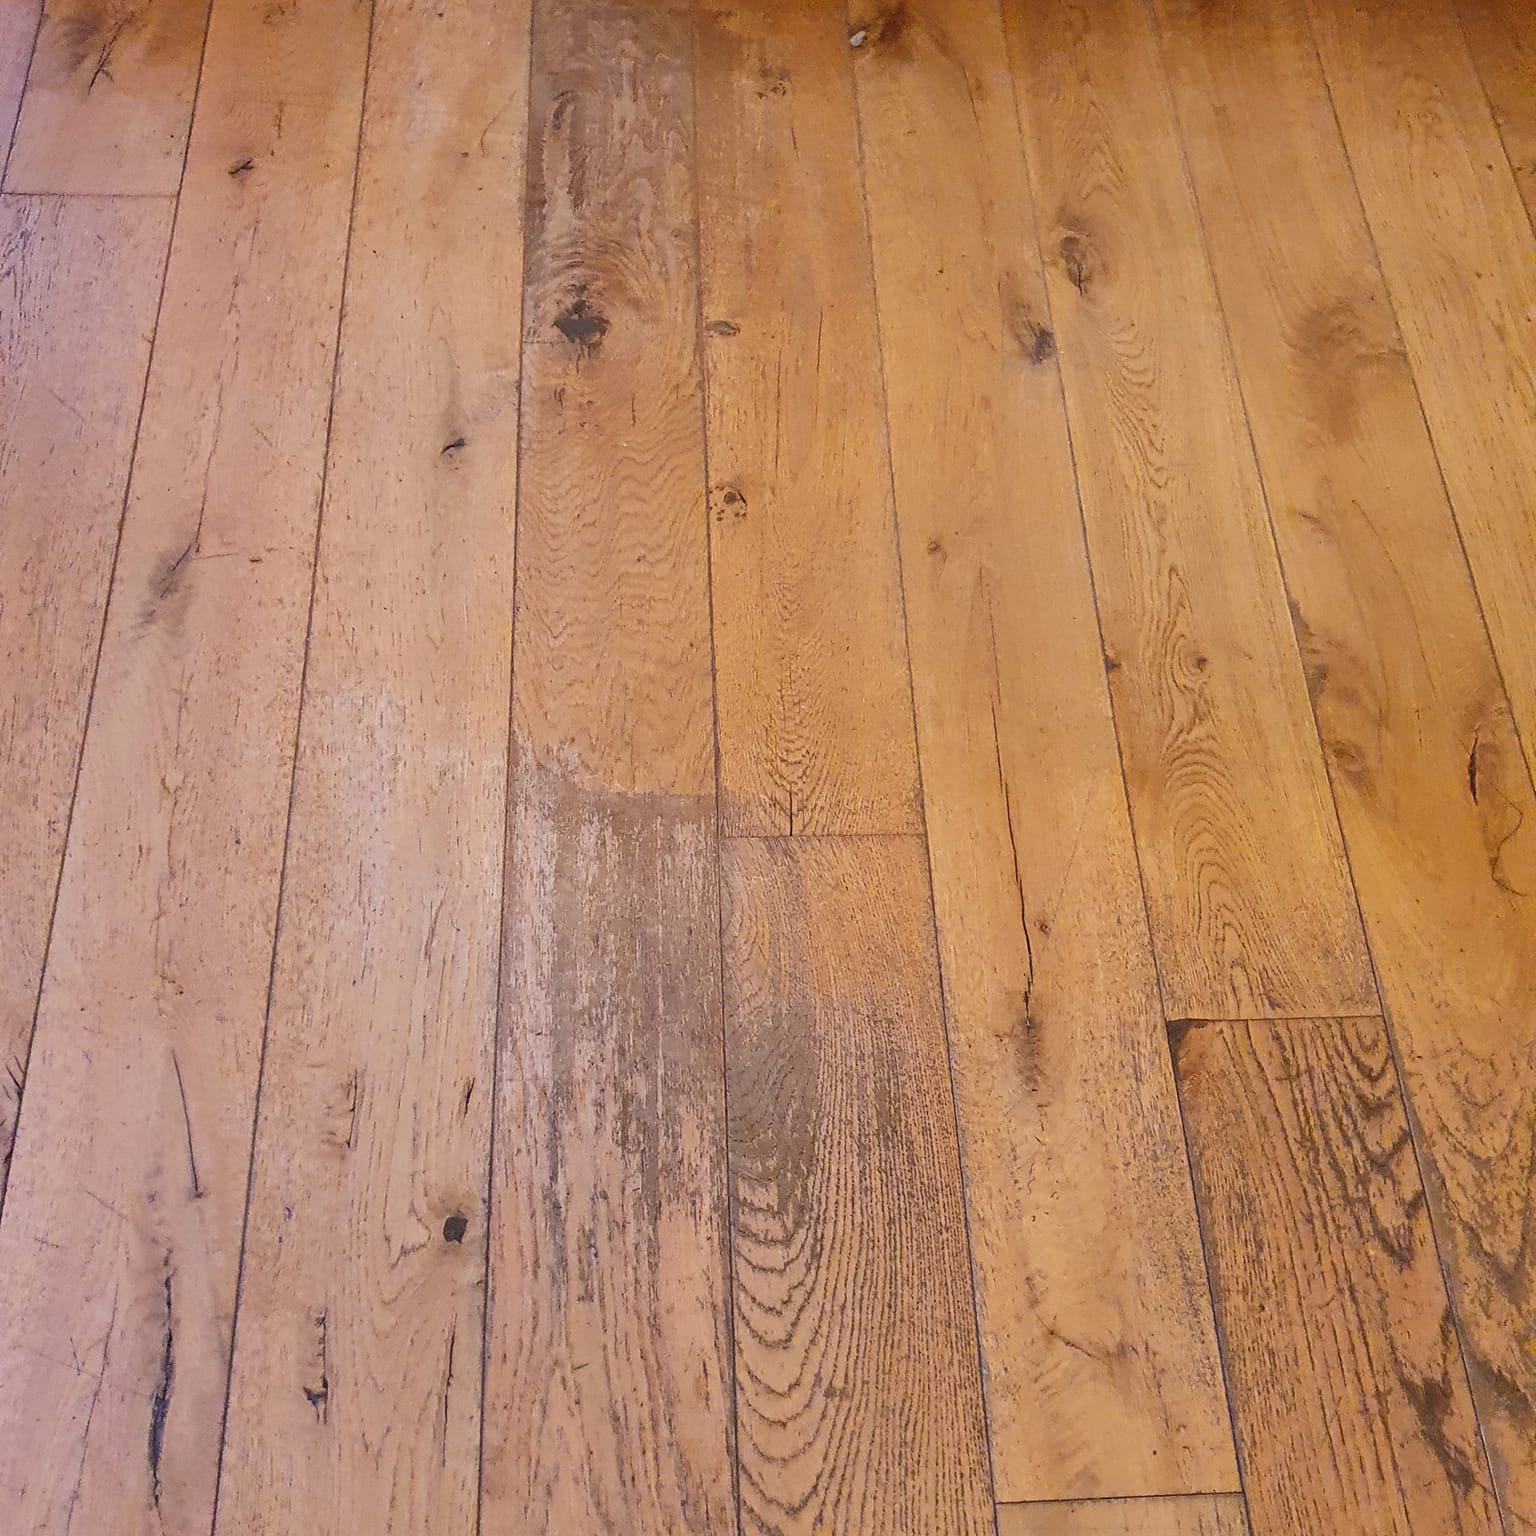 Hard wood floor with scratches and damage